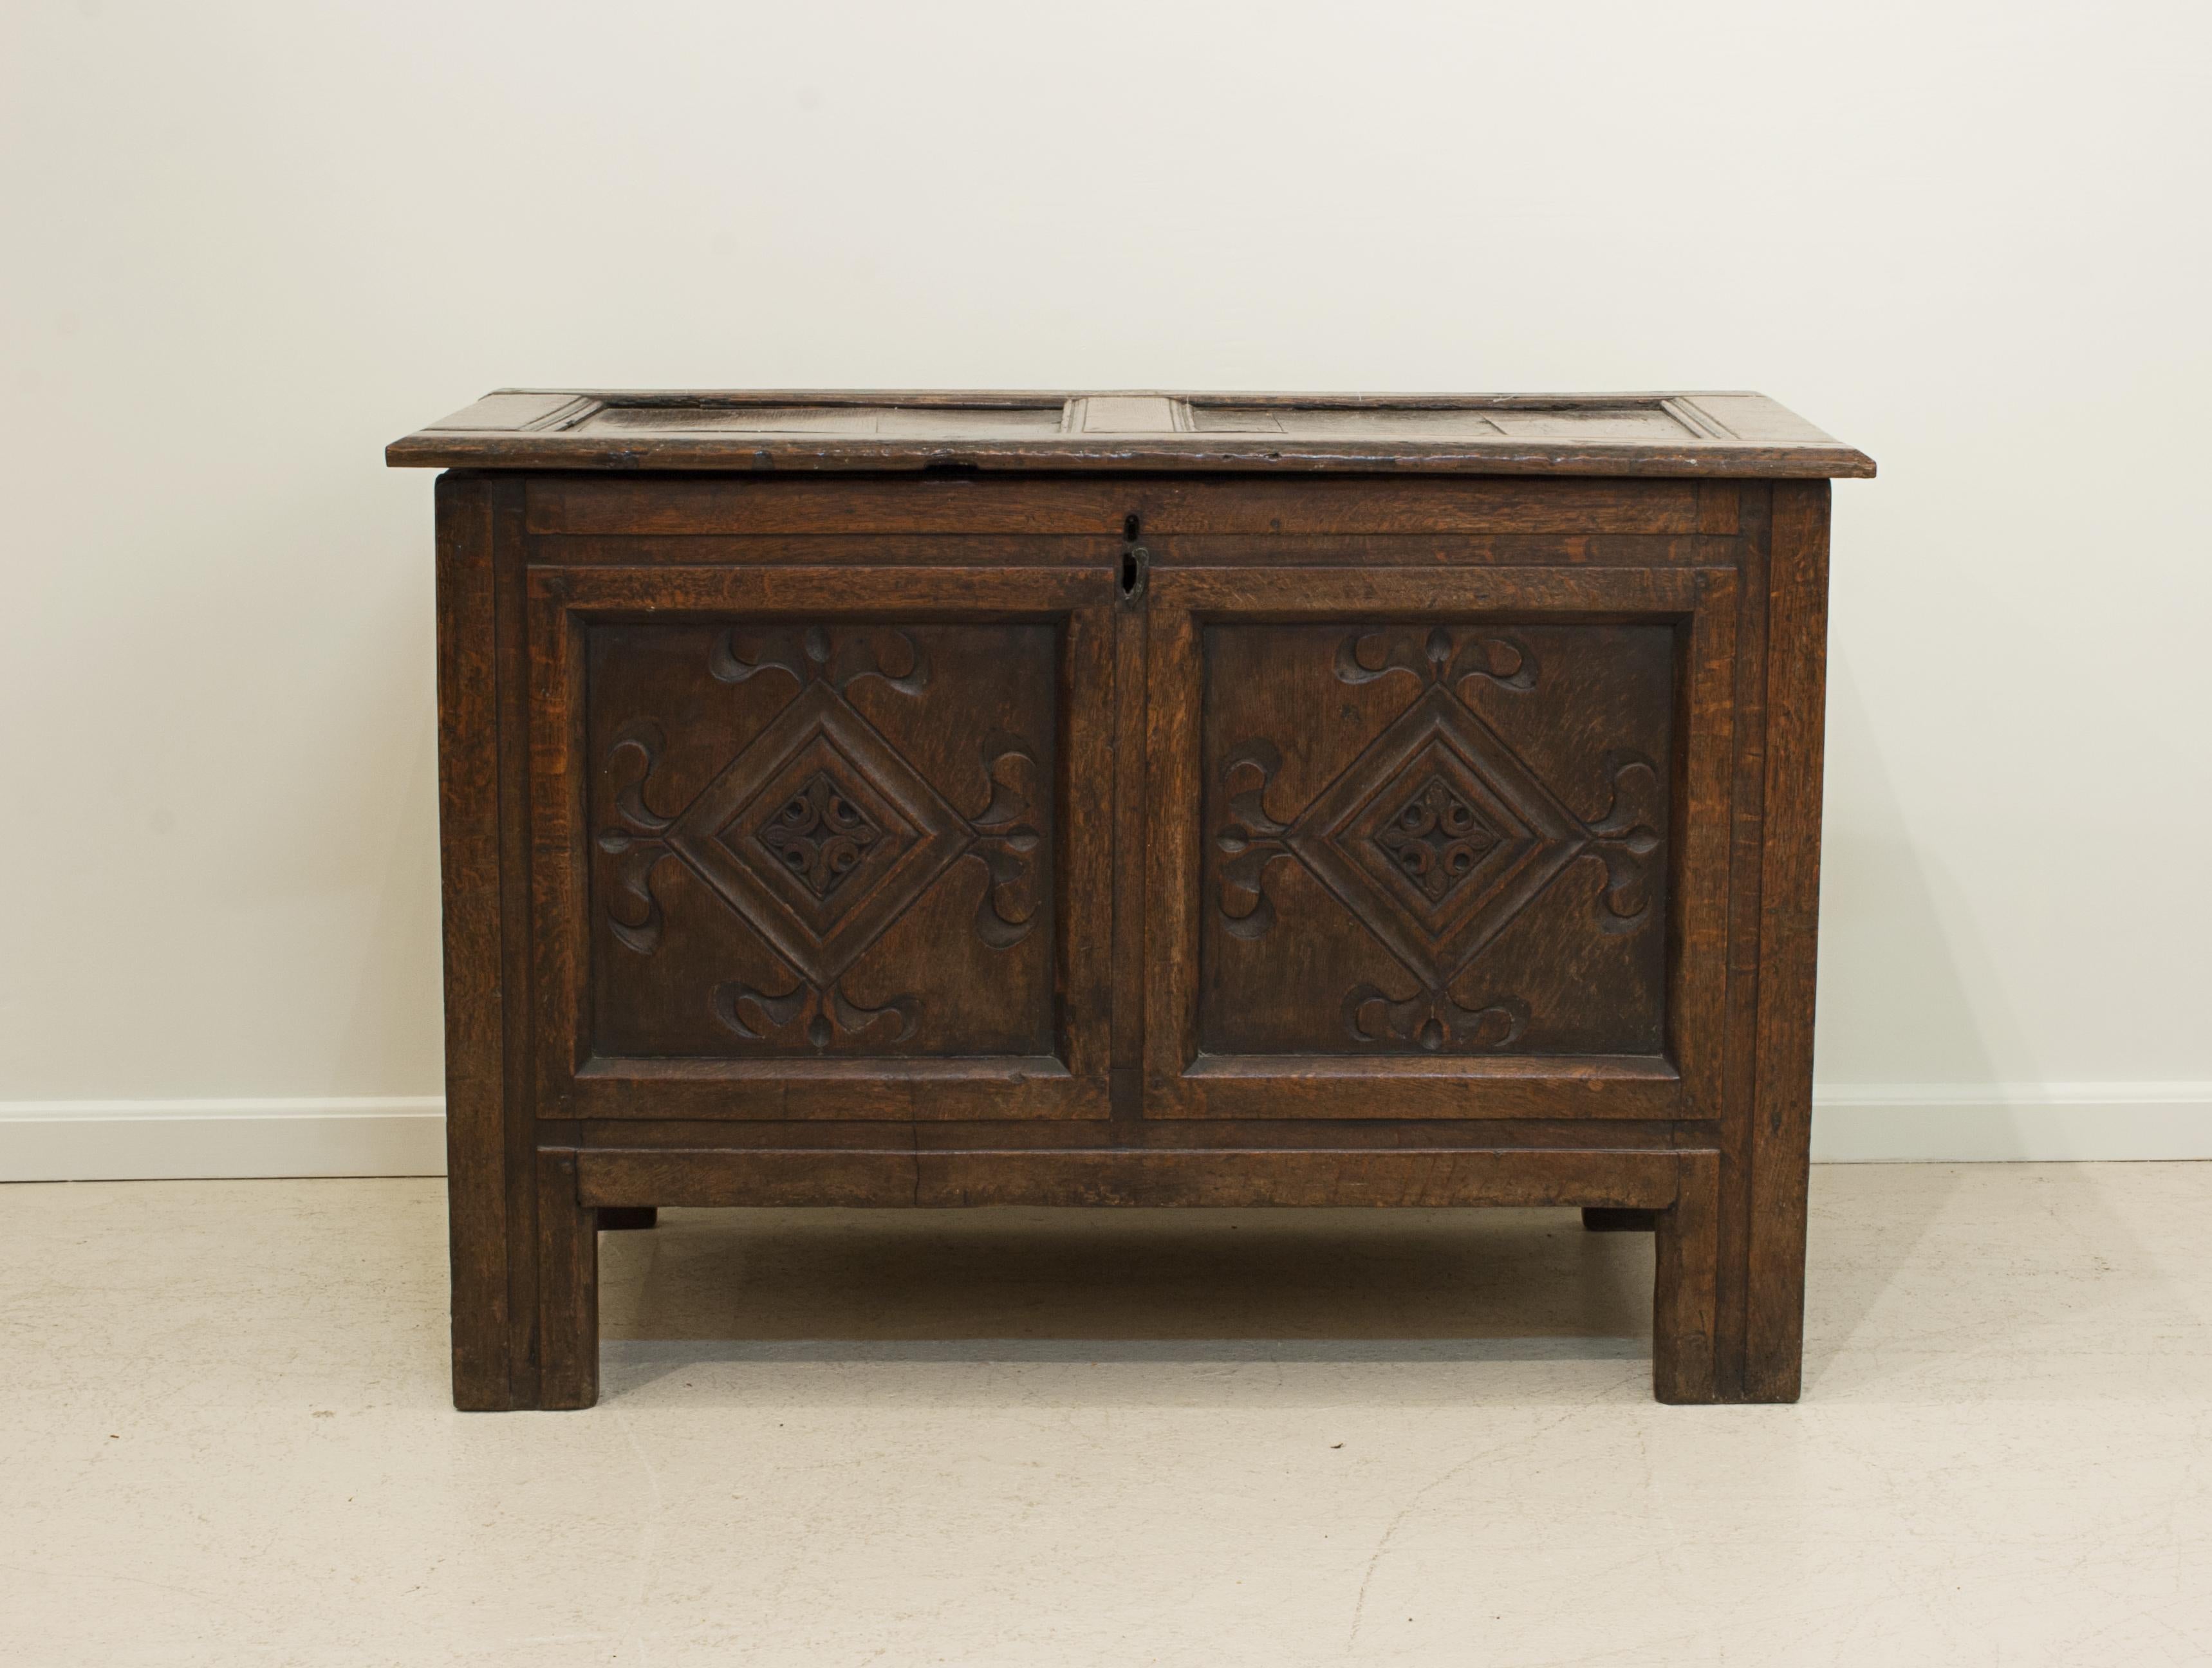 Antique Oak Coffer.
A lovely small proportioned oak antique coffer or chest from the 18th century. The chest with a carved two panel front and made with peg-joined construction. It has a two-paneled top with lock, no key, and iron hinges. A great